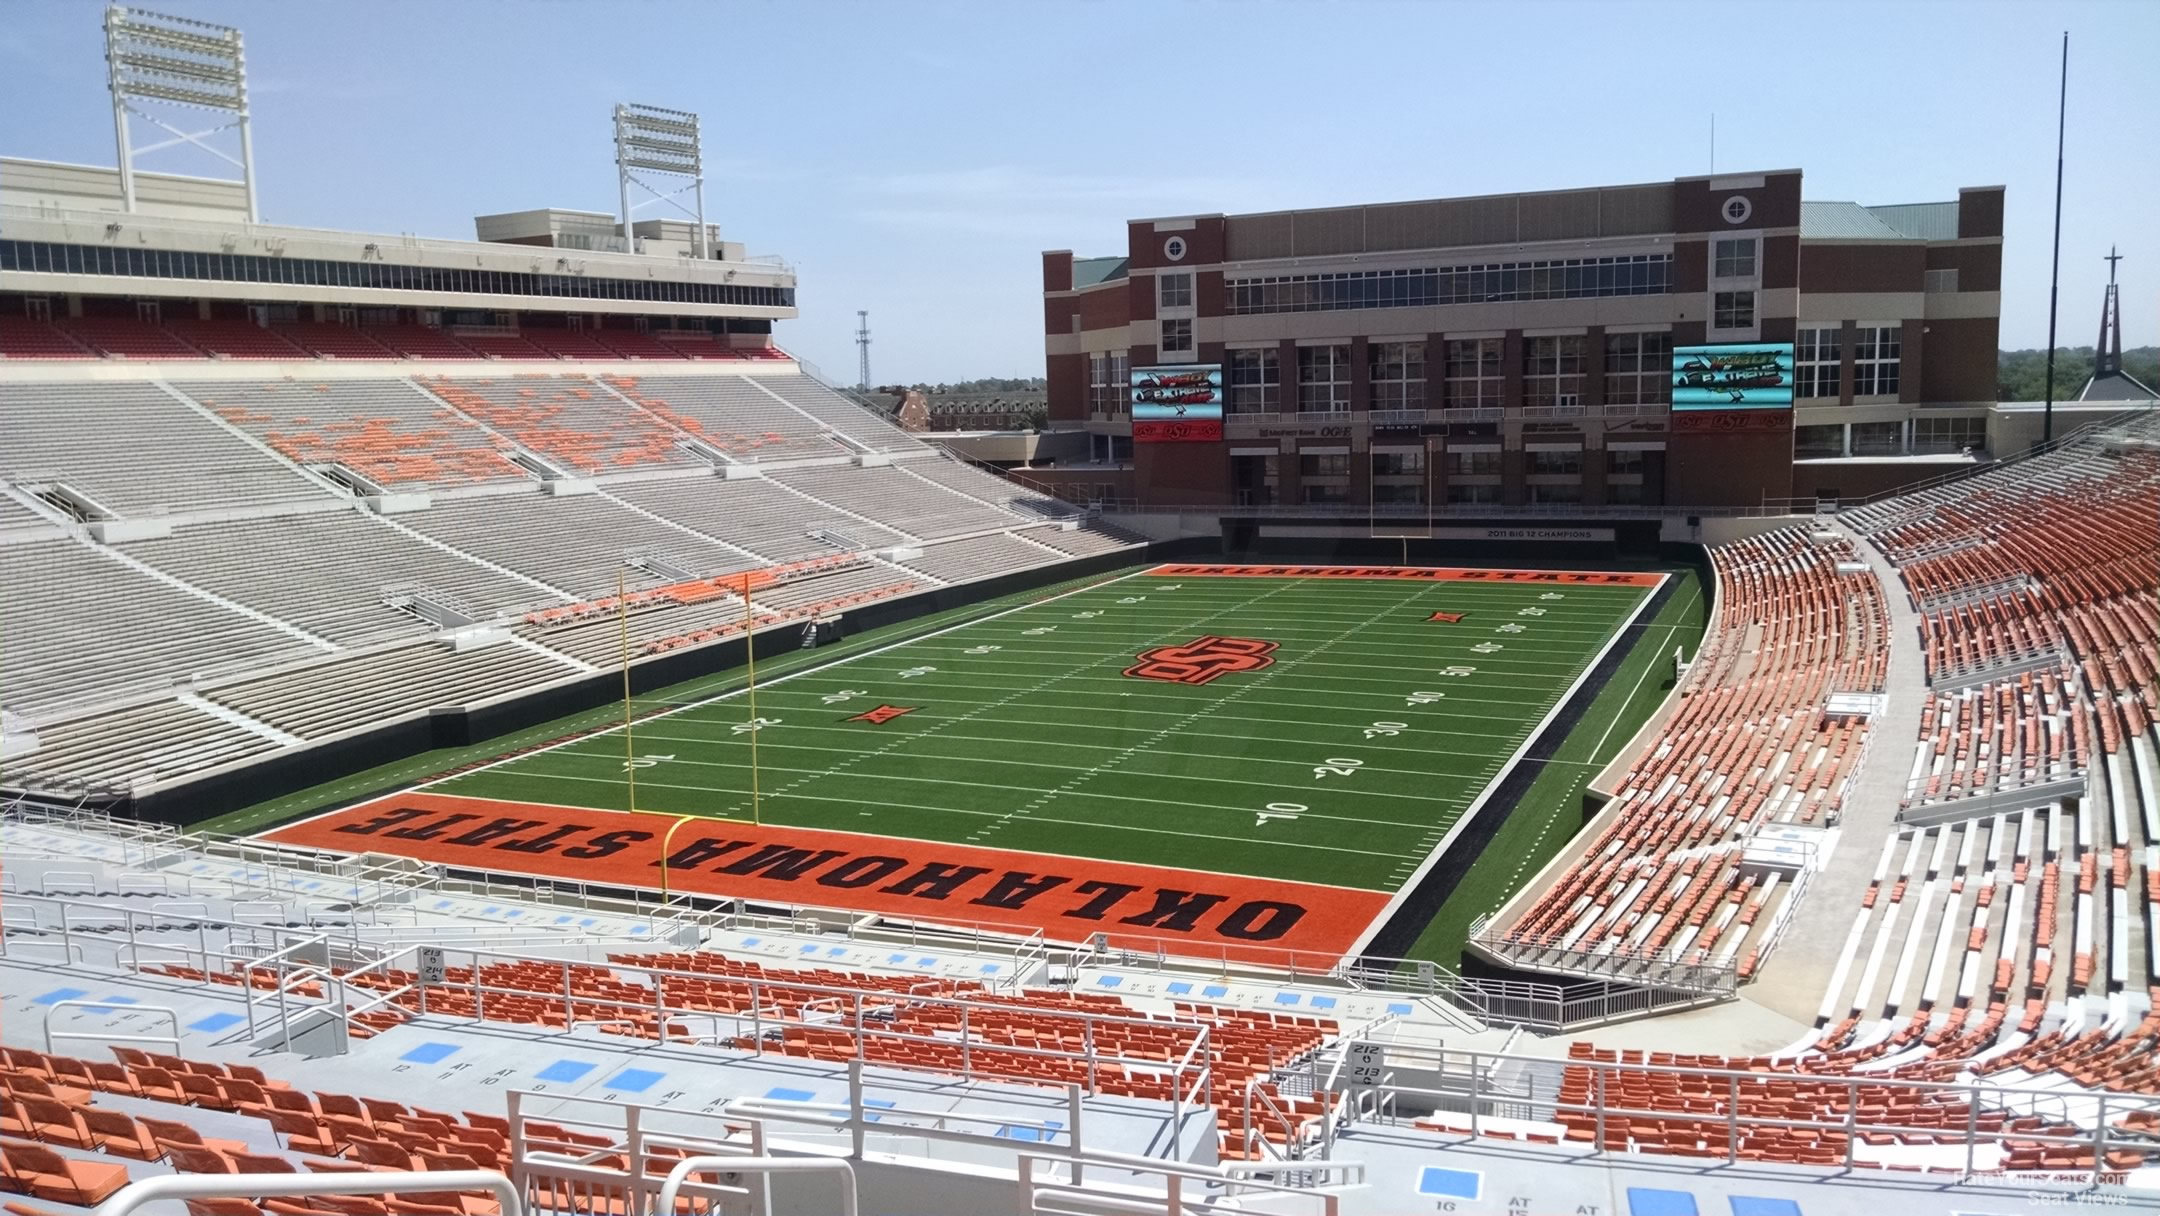 section 315, row 19 seat view  - boone pickens stadium